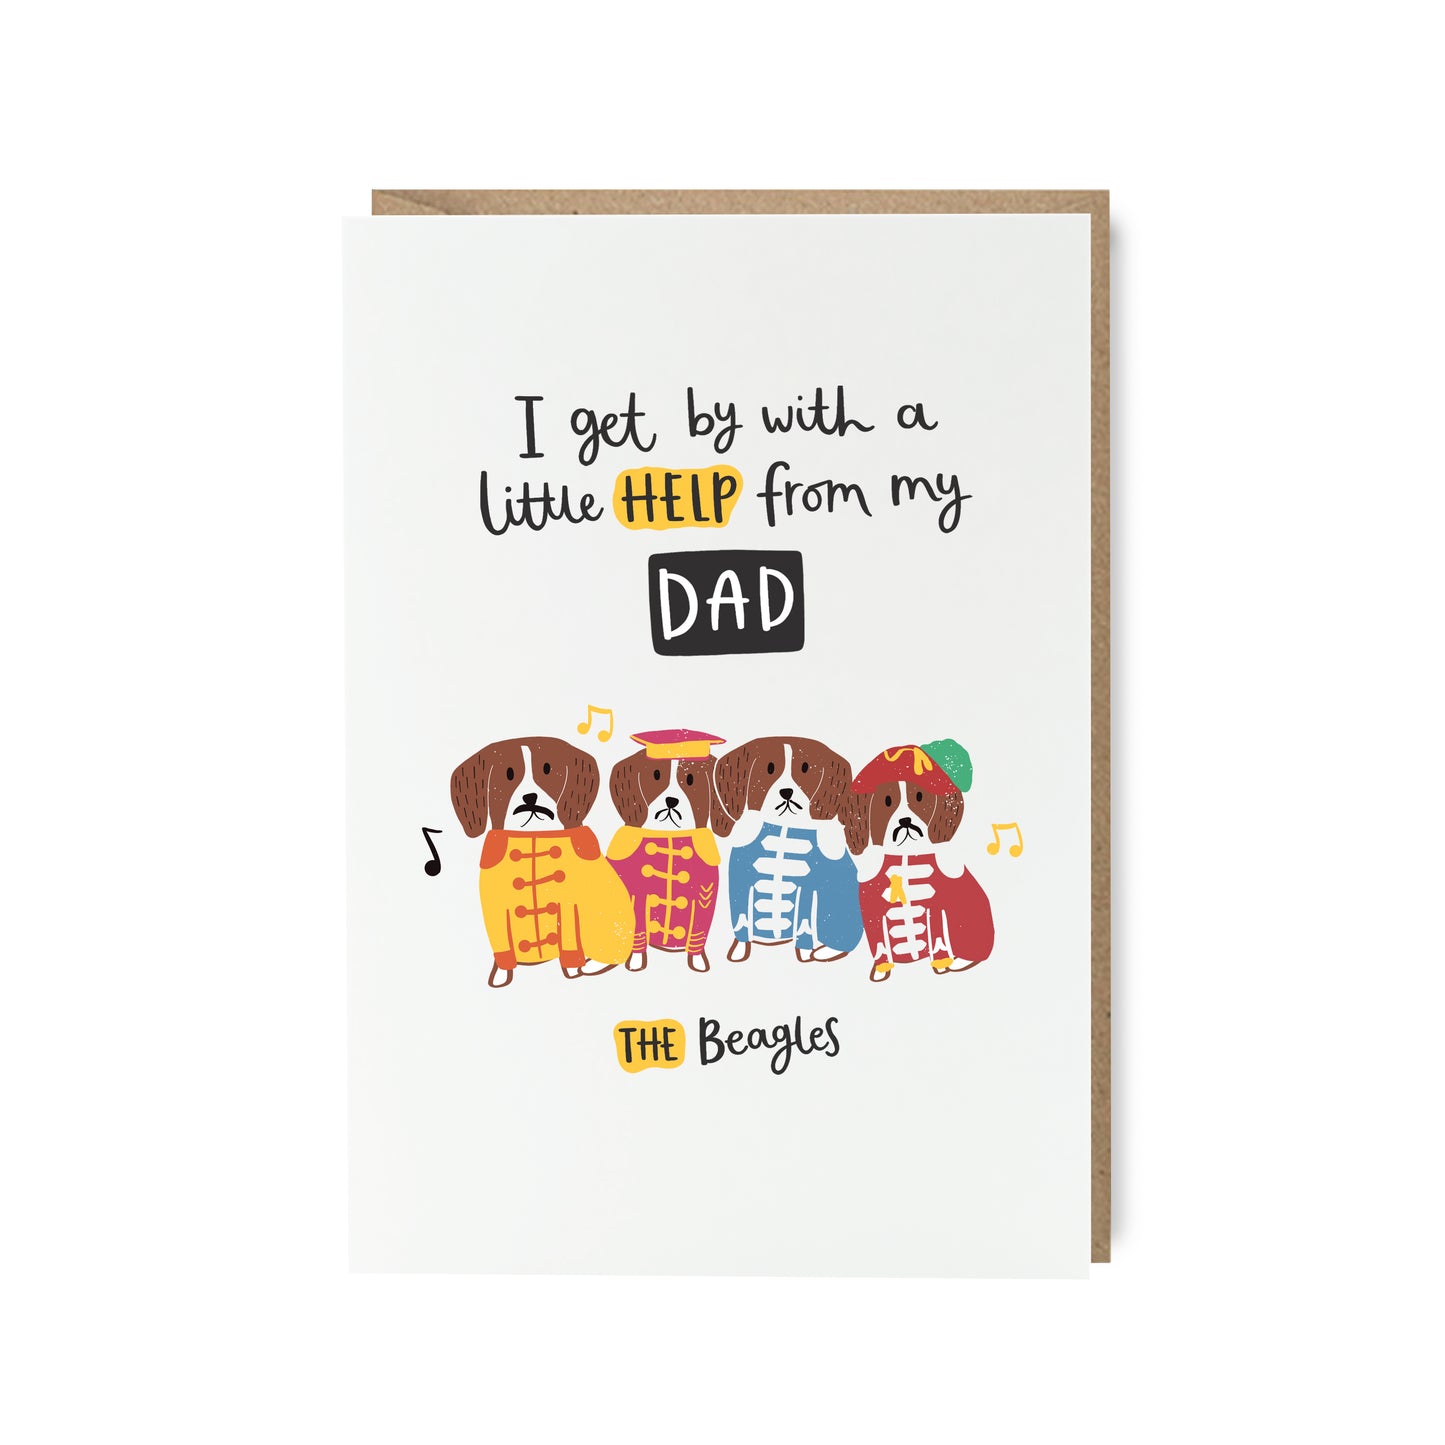 The beagles funny father's day card for the beatles lovers by Abbie imagine